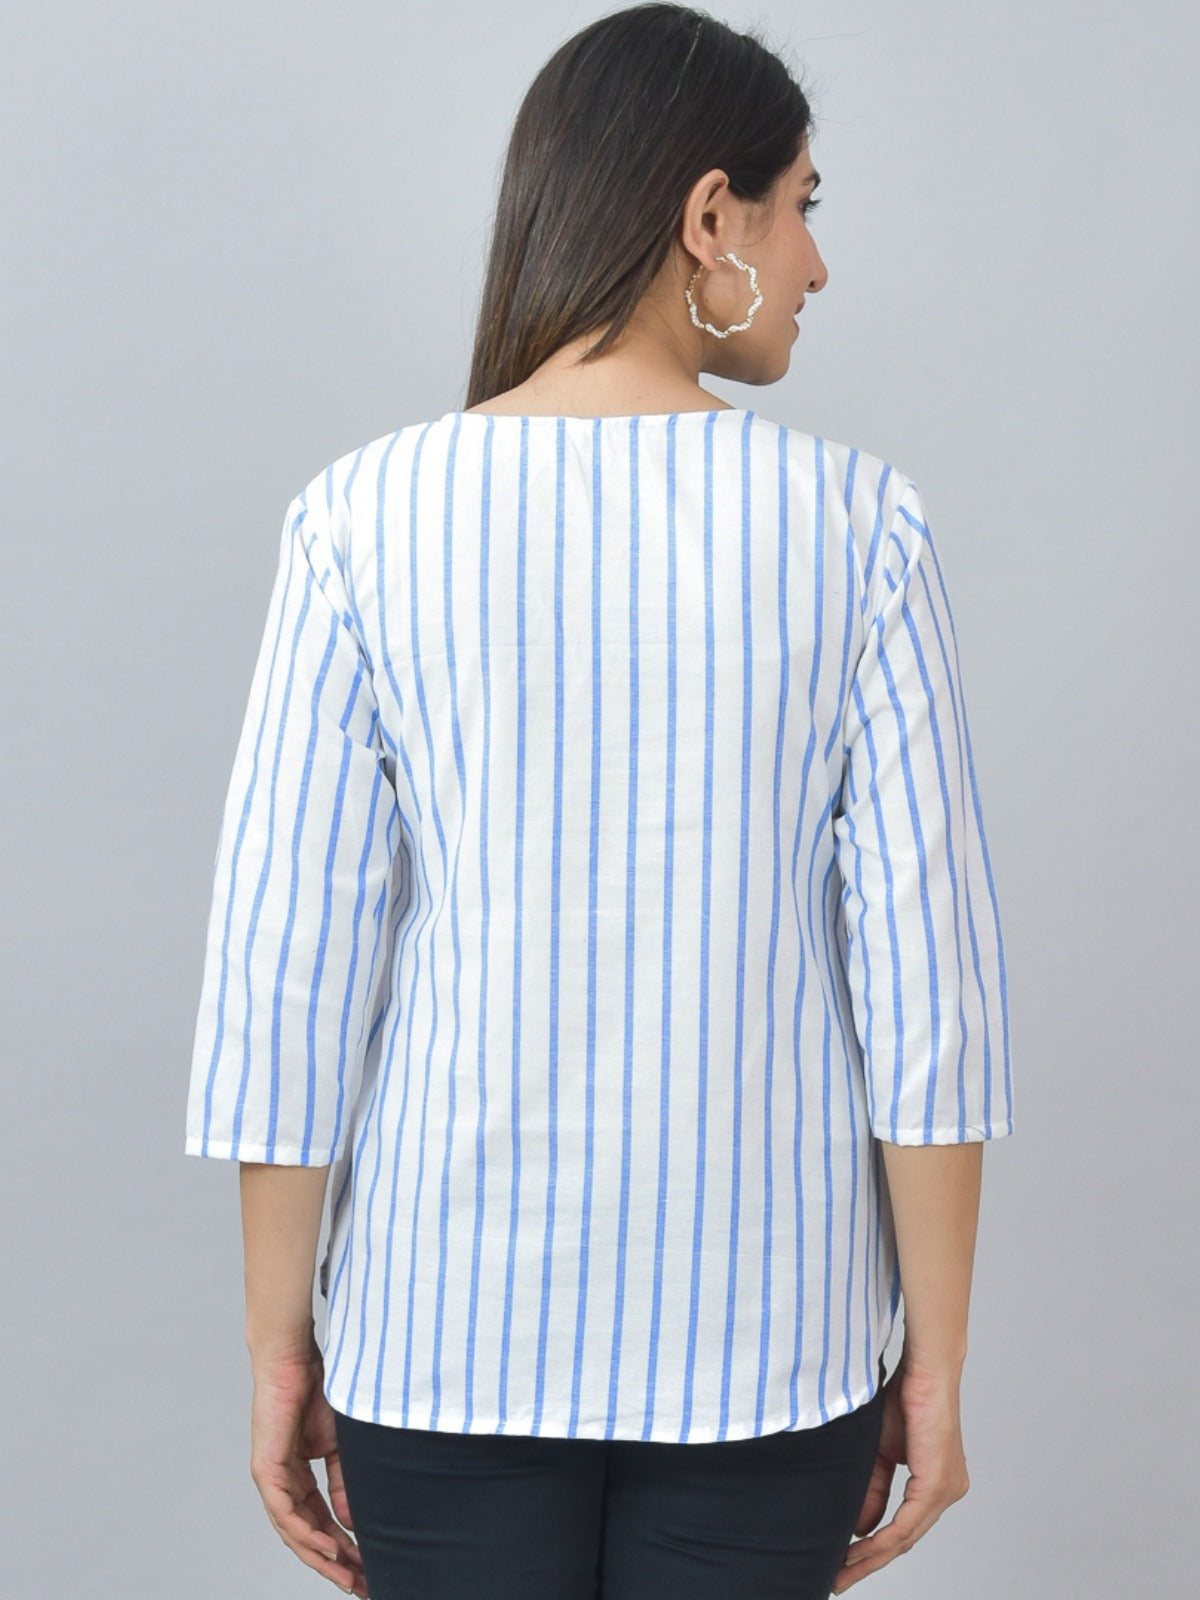 Pack Of 2 Dark Blue And Blue Dark Striped Cotton Womens Top Combo